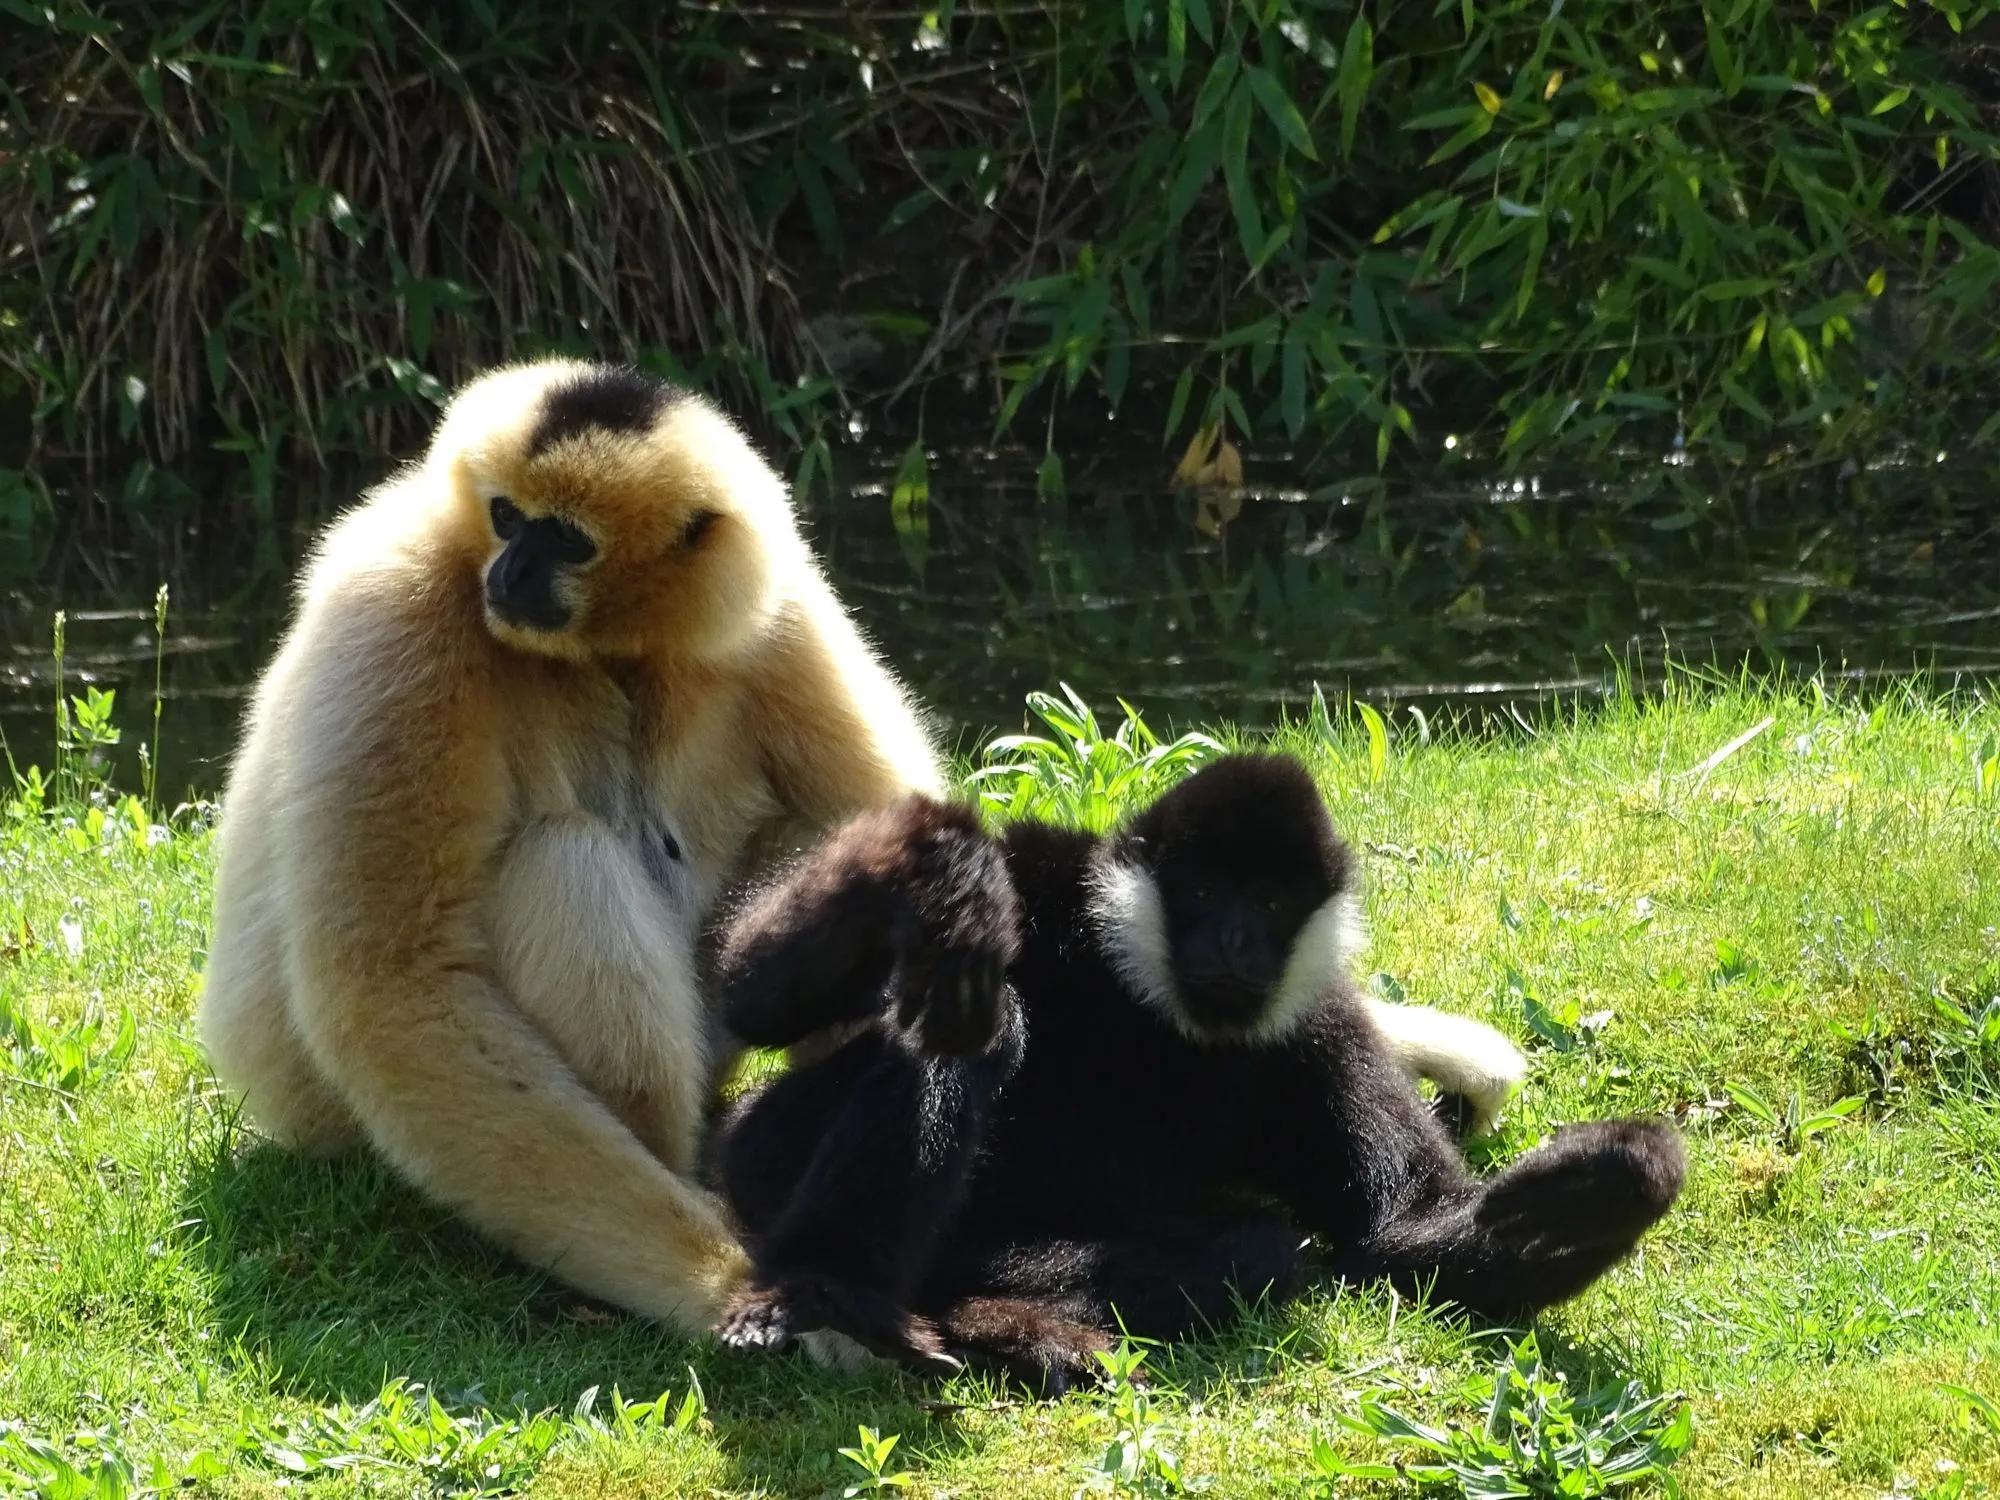 Northern white-cheeked gibbon facts are fascinating.